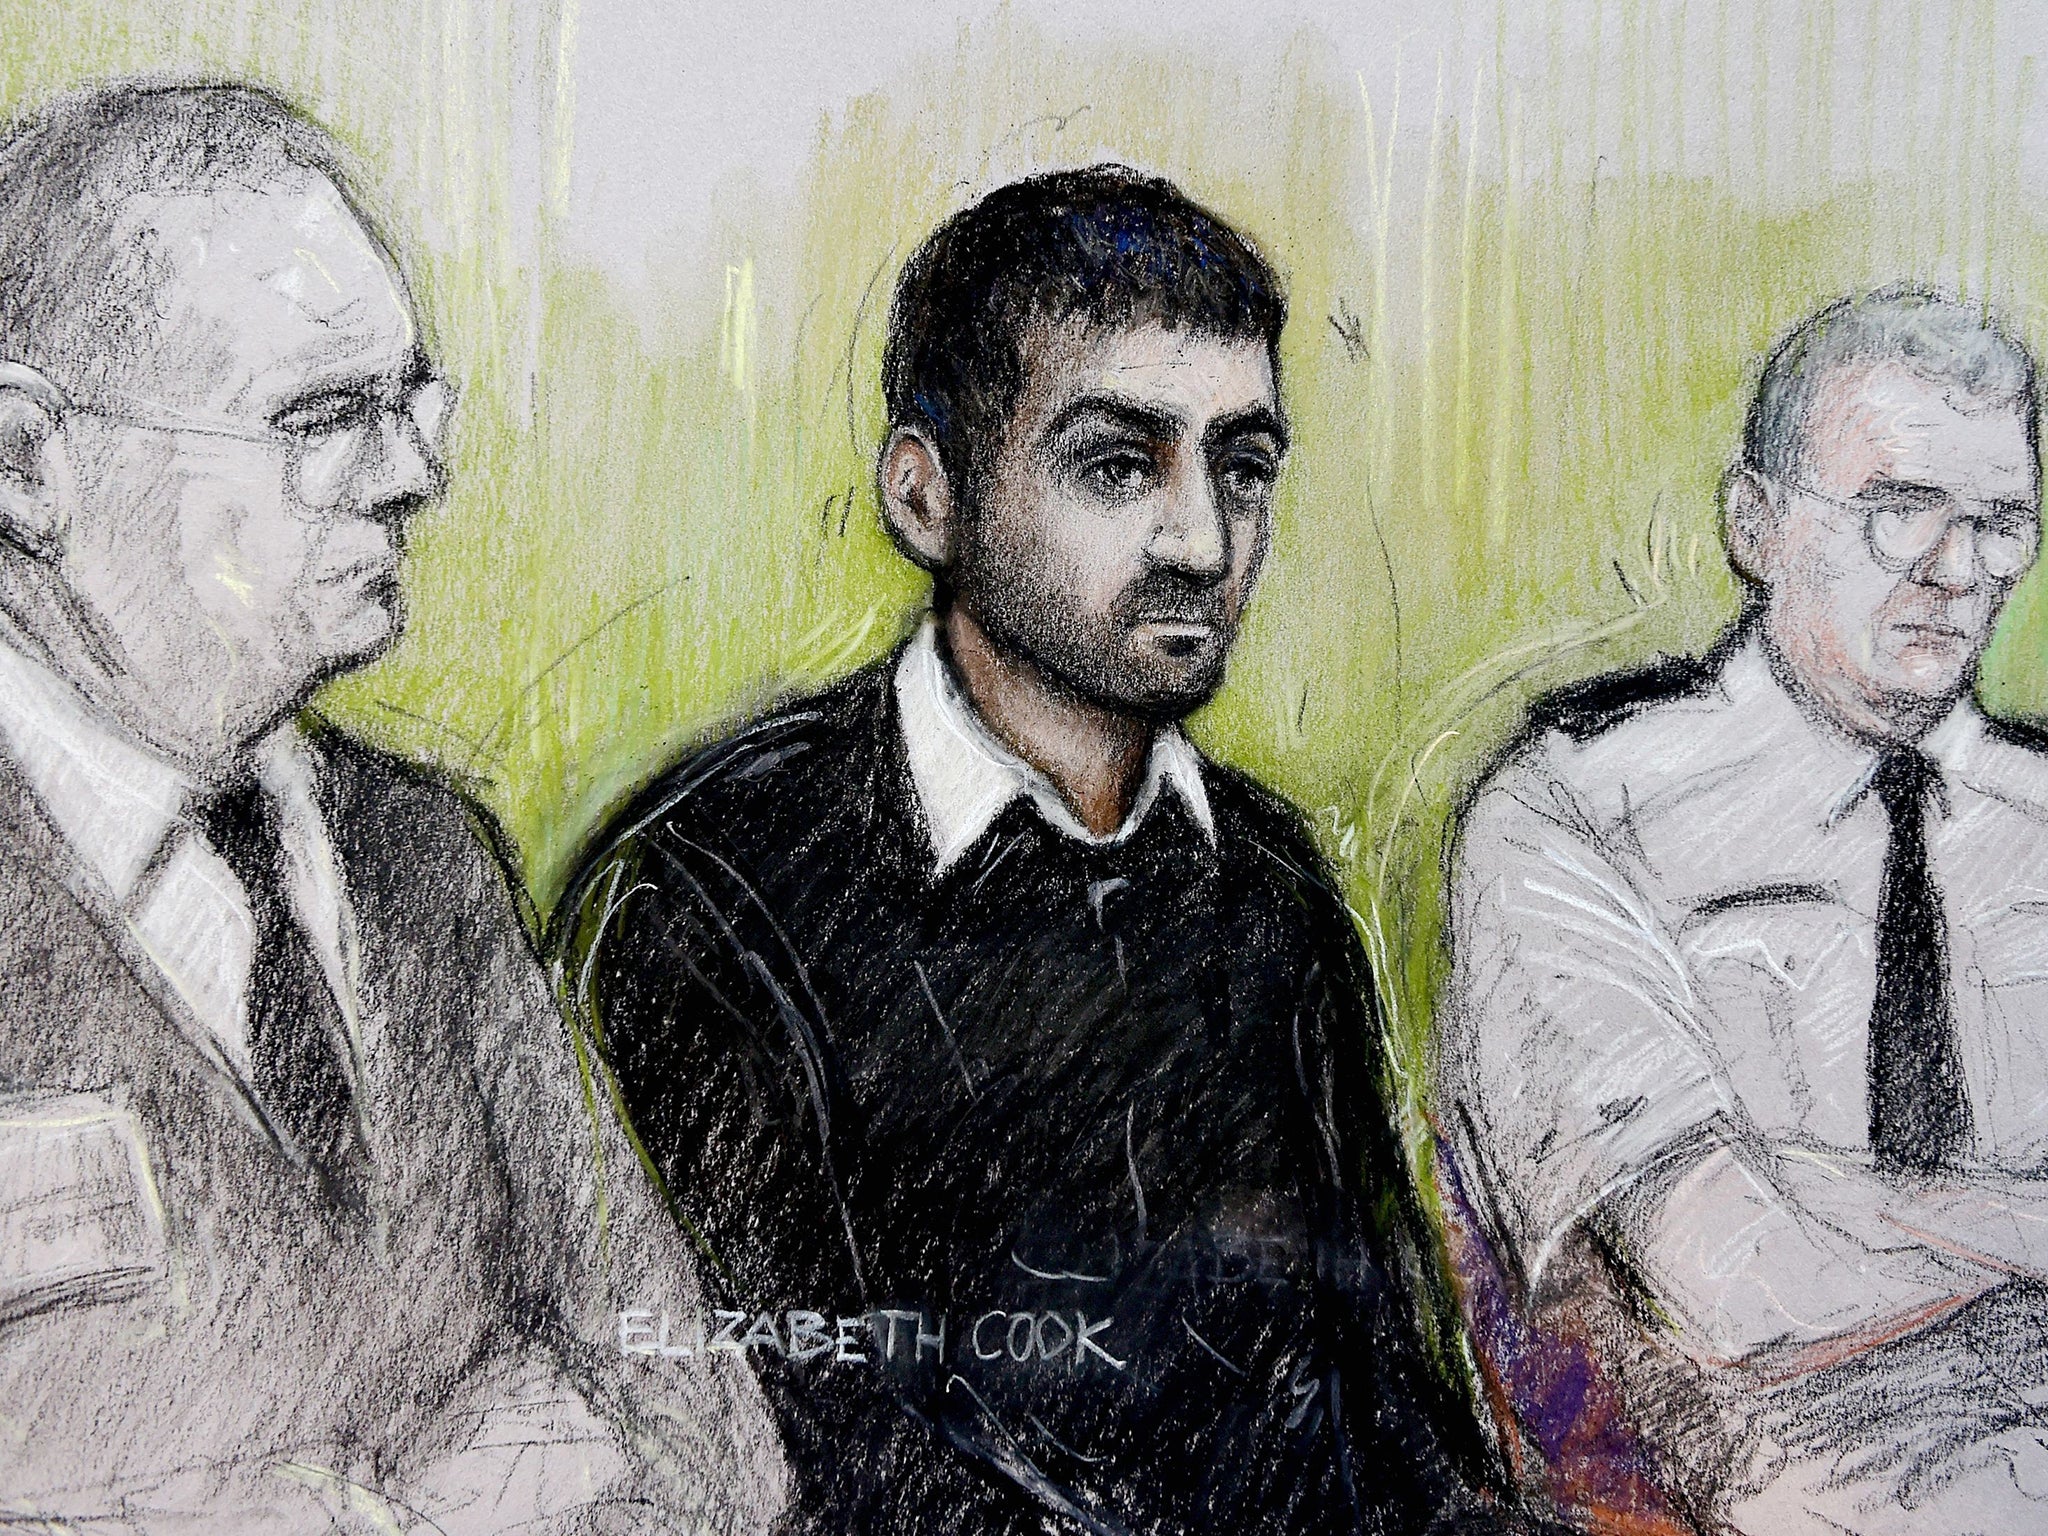 Erol Incedal (centre) who has been cleared of targeting Tony Blair and his wife Cherie as part of a terrorist plot